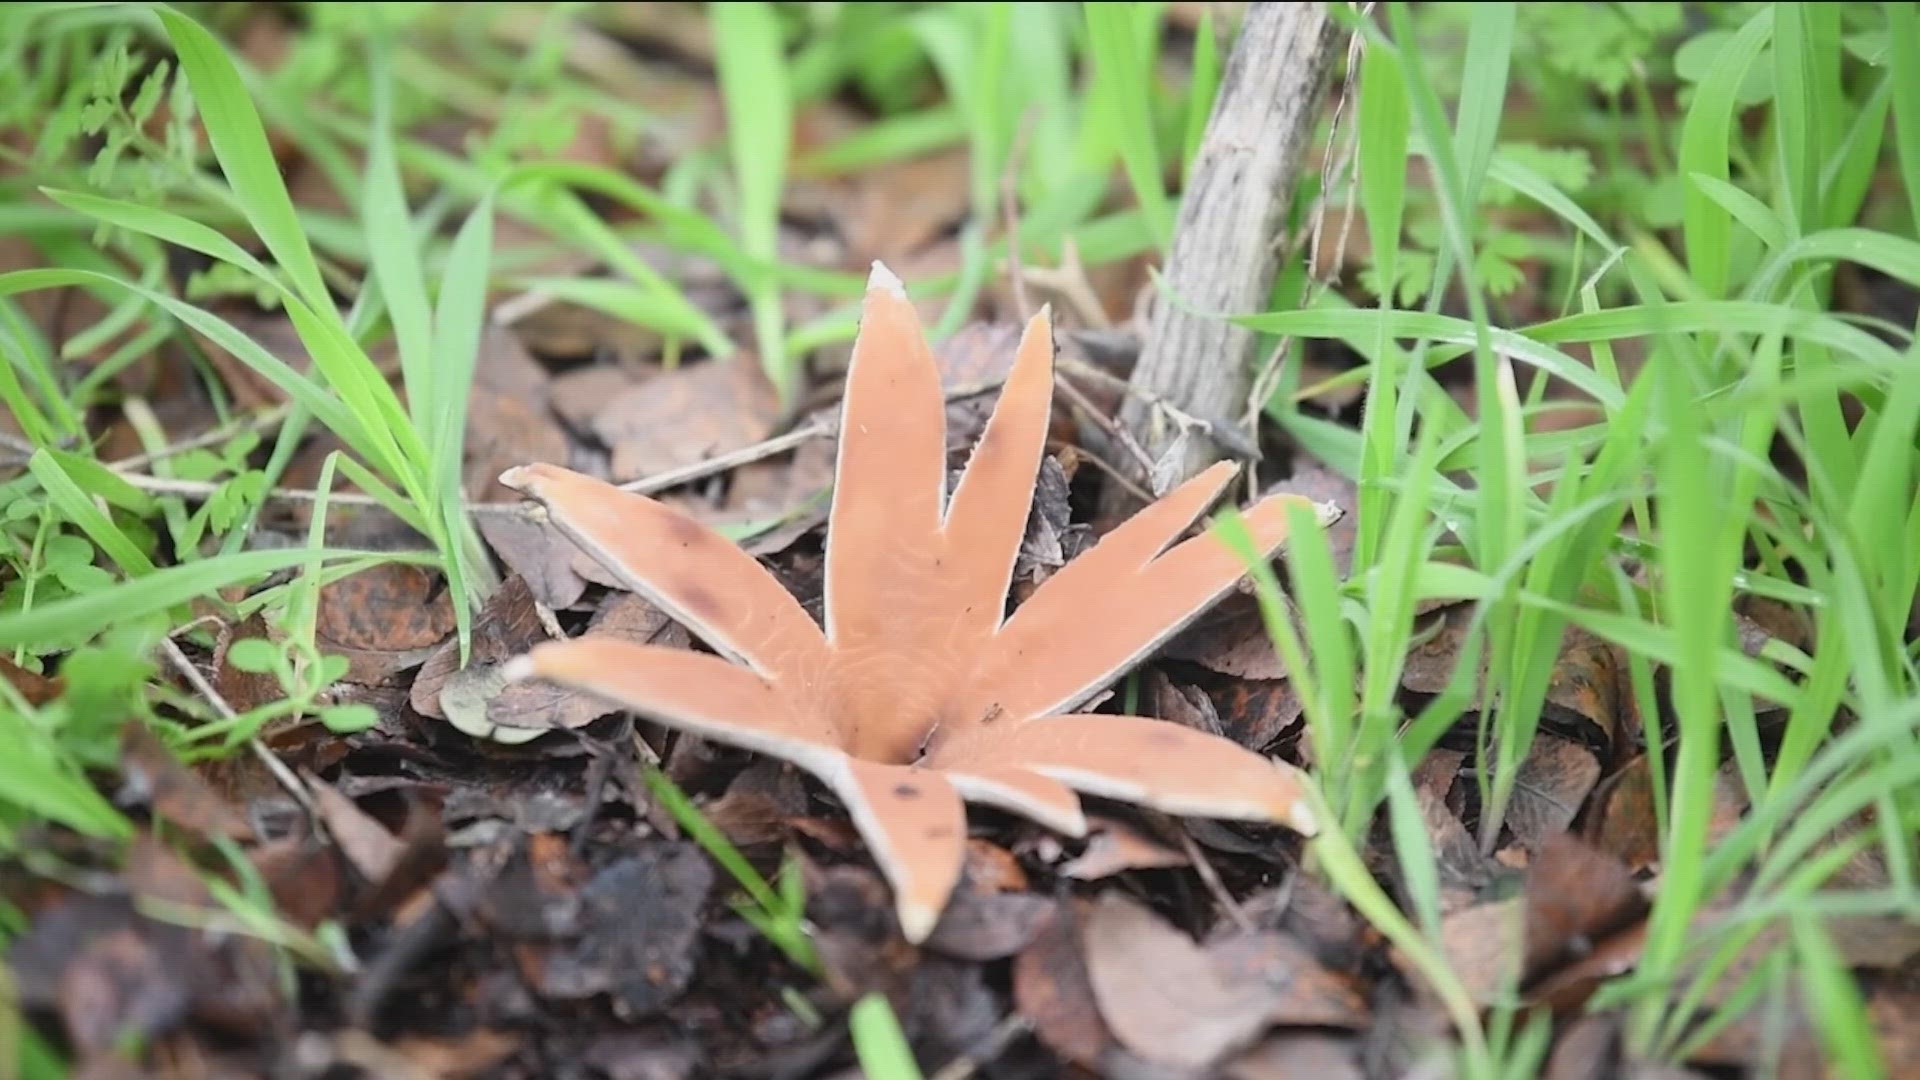 The mysterious plant has been showing up lately at Austin's Zilker Botanical Gardens.